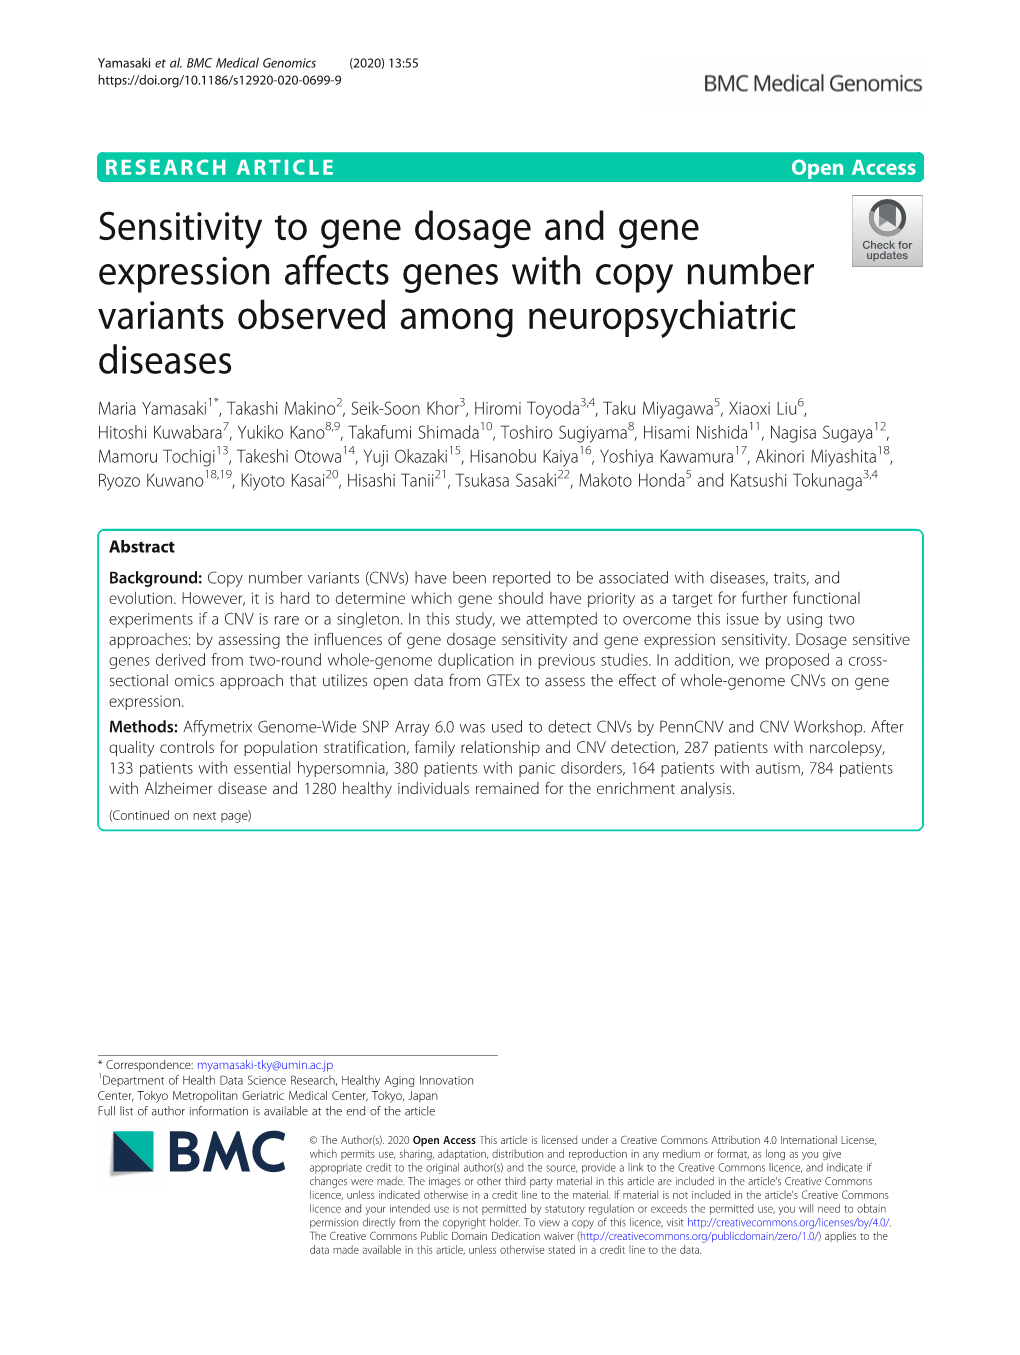 Sensitivity to Gene Dosage and Gene Expression Affects Genes with Copy Number Variants Observed Among Neuropsychiatric Diseases